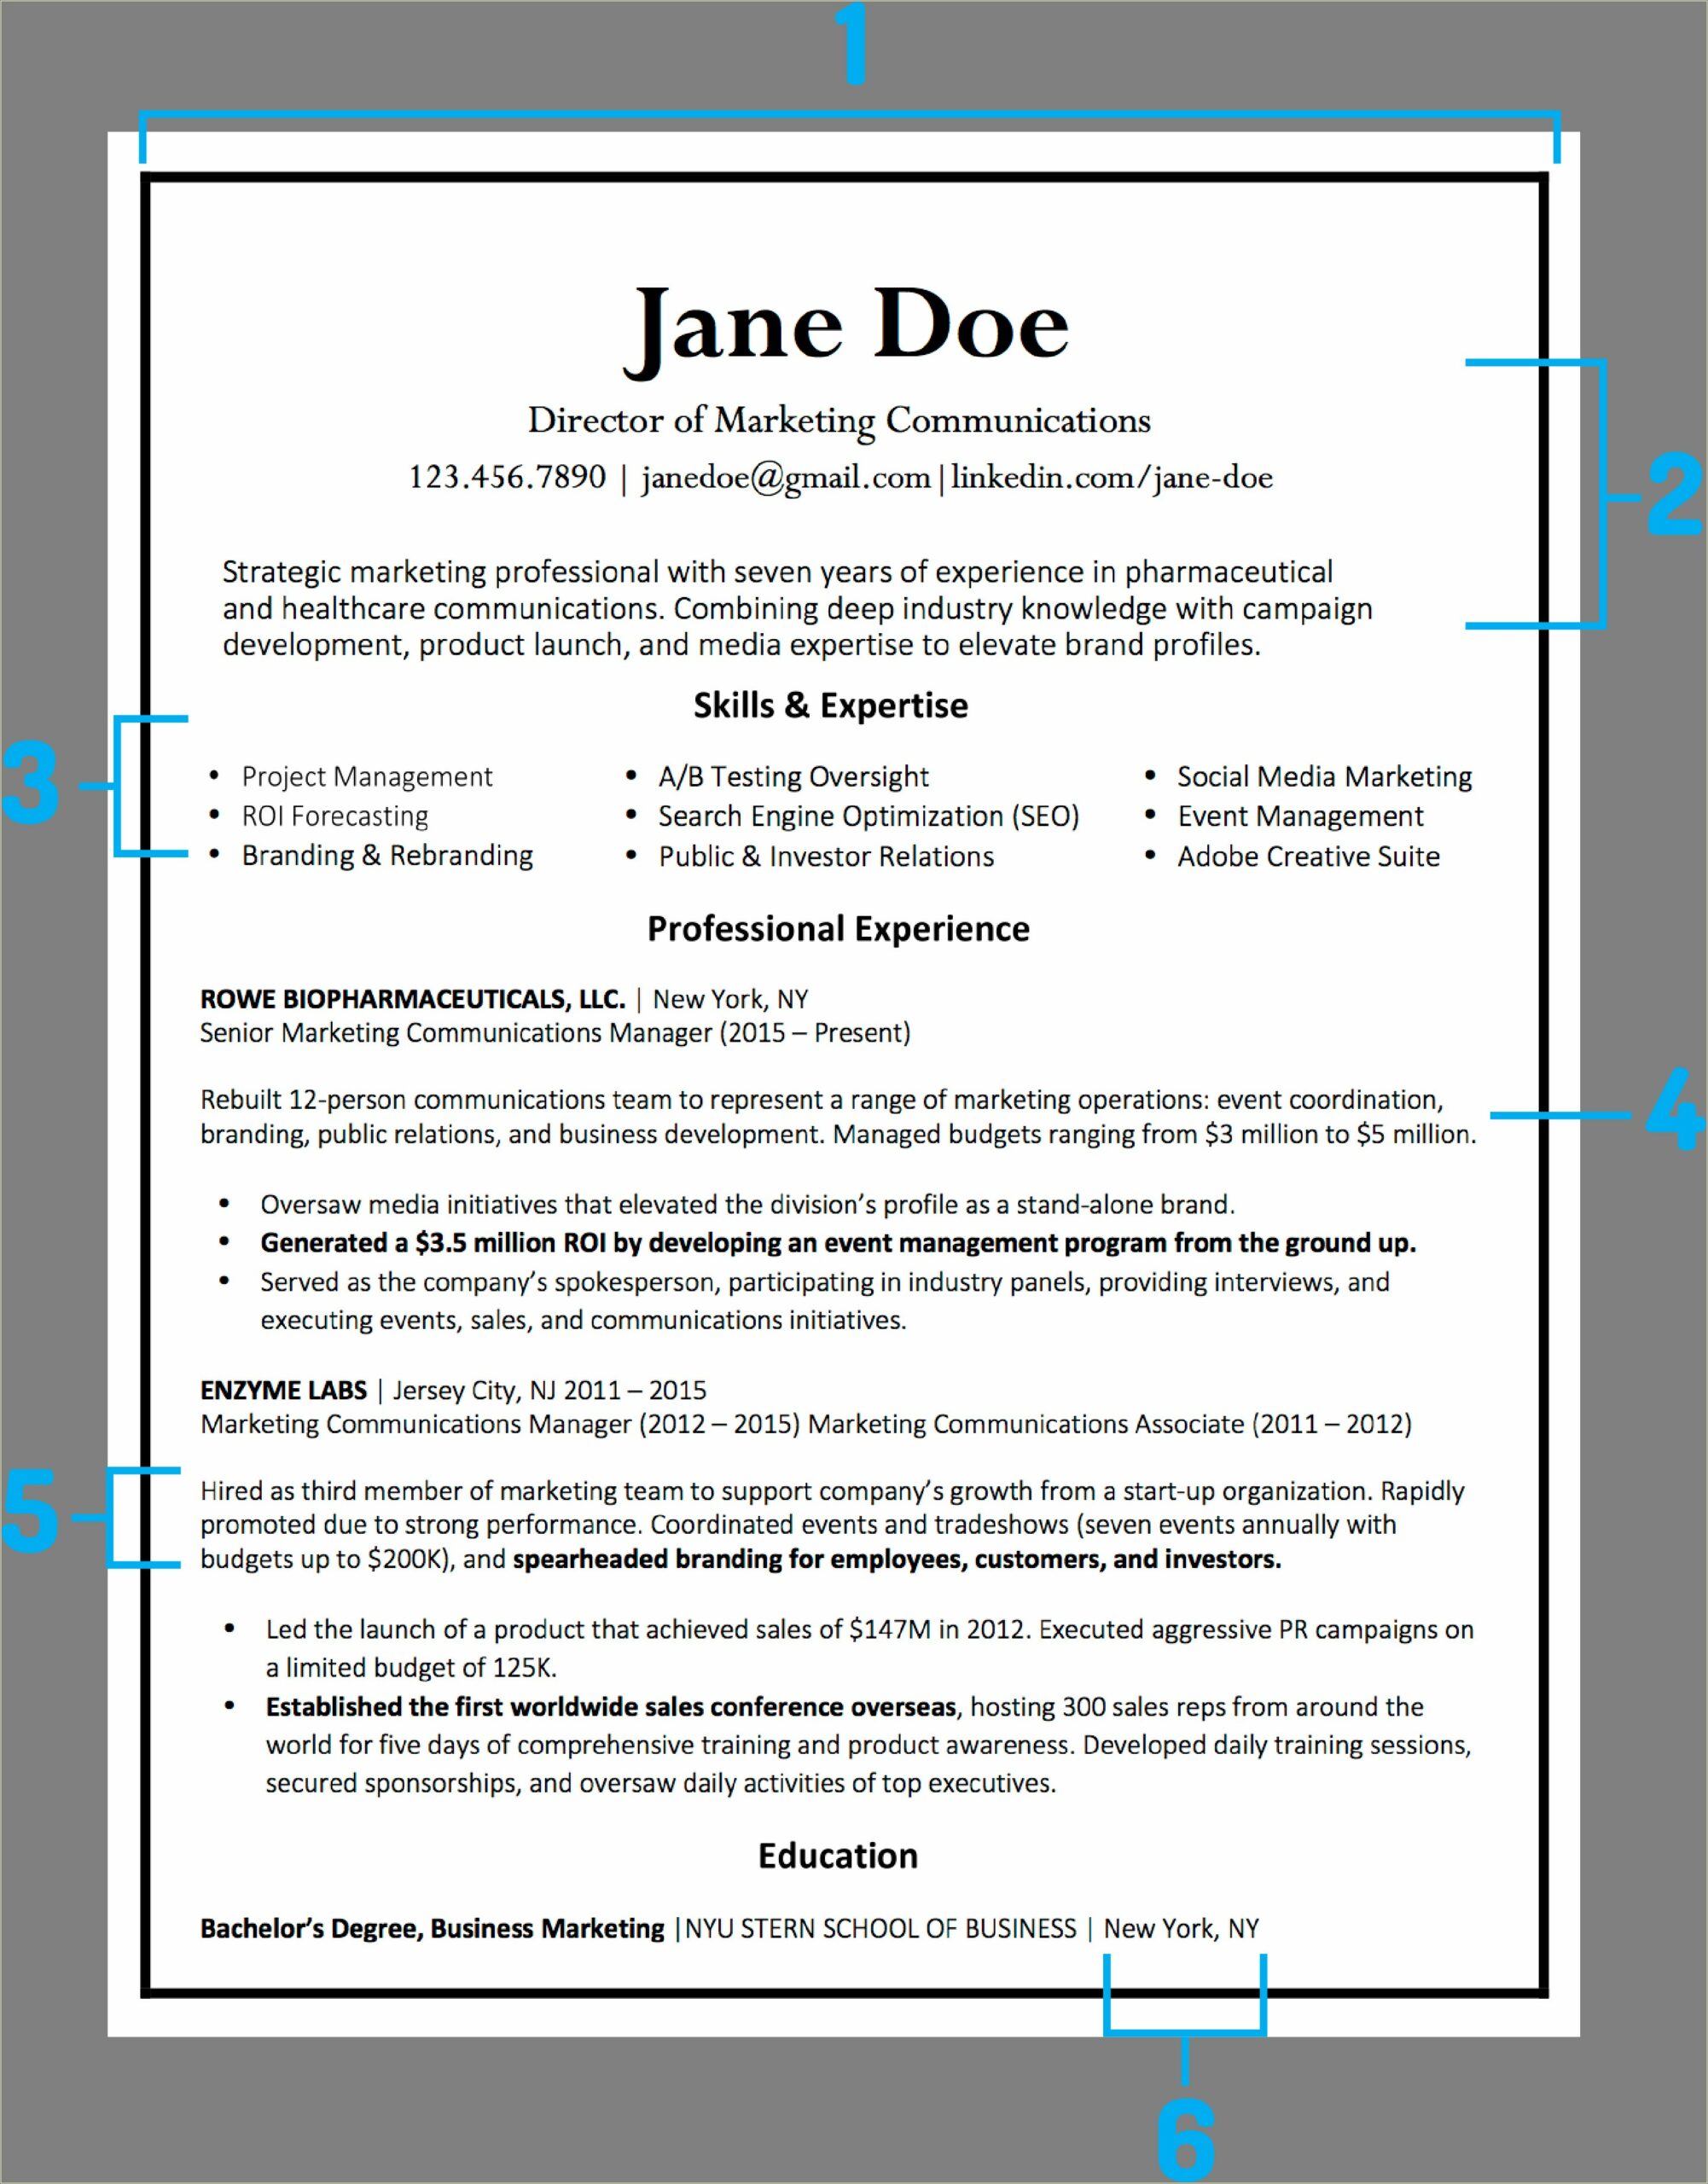 Resume Professional Summary Example In Third Person